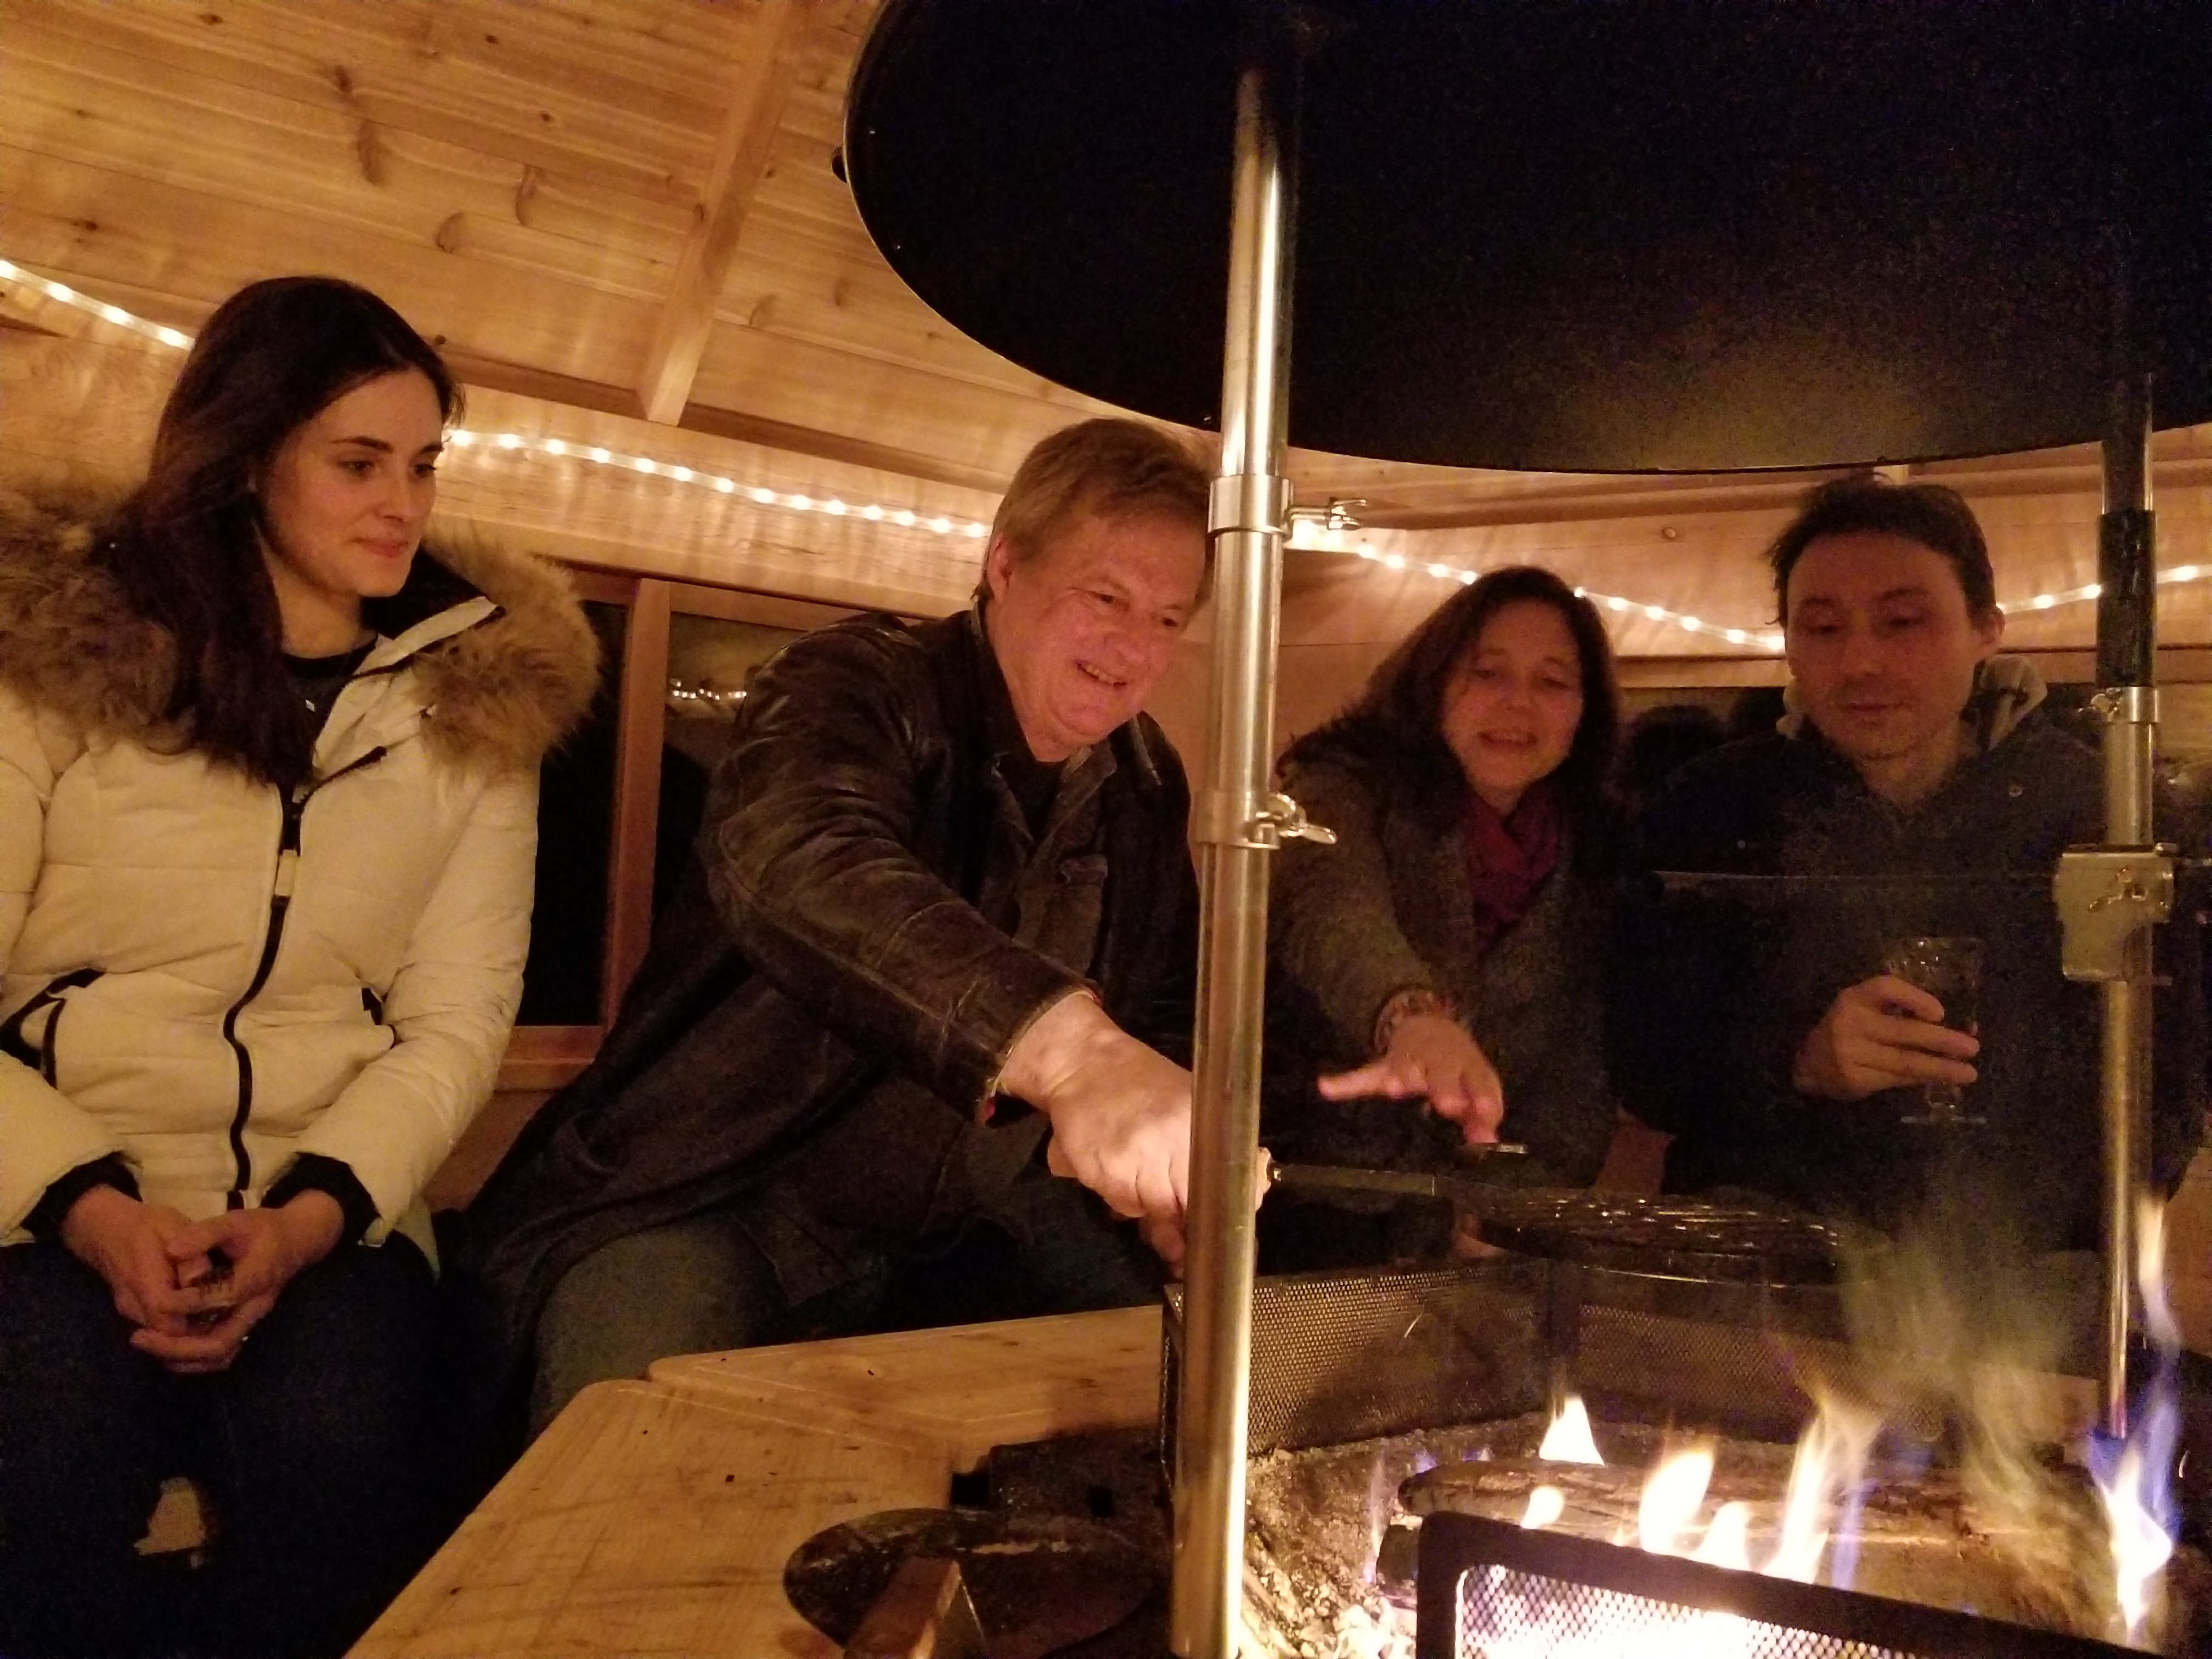     A group of people sit around inside a Kota Cabin looking at the fire.   